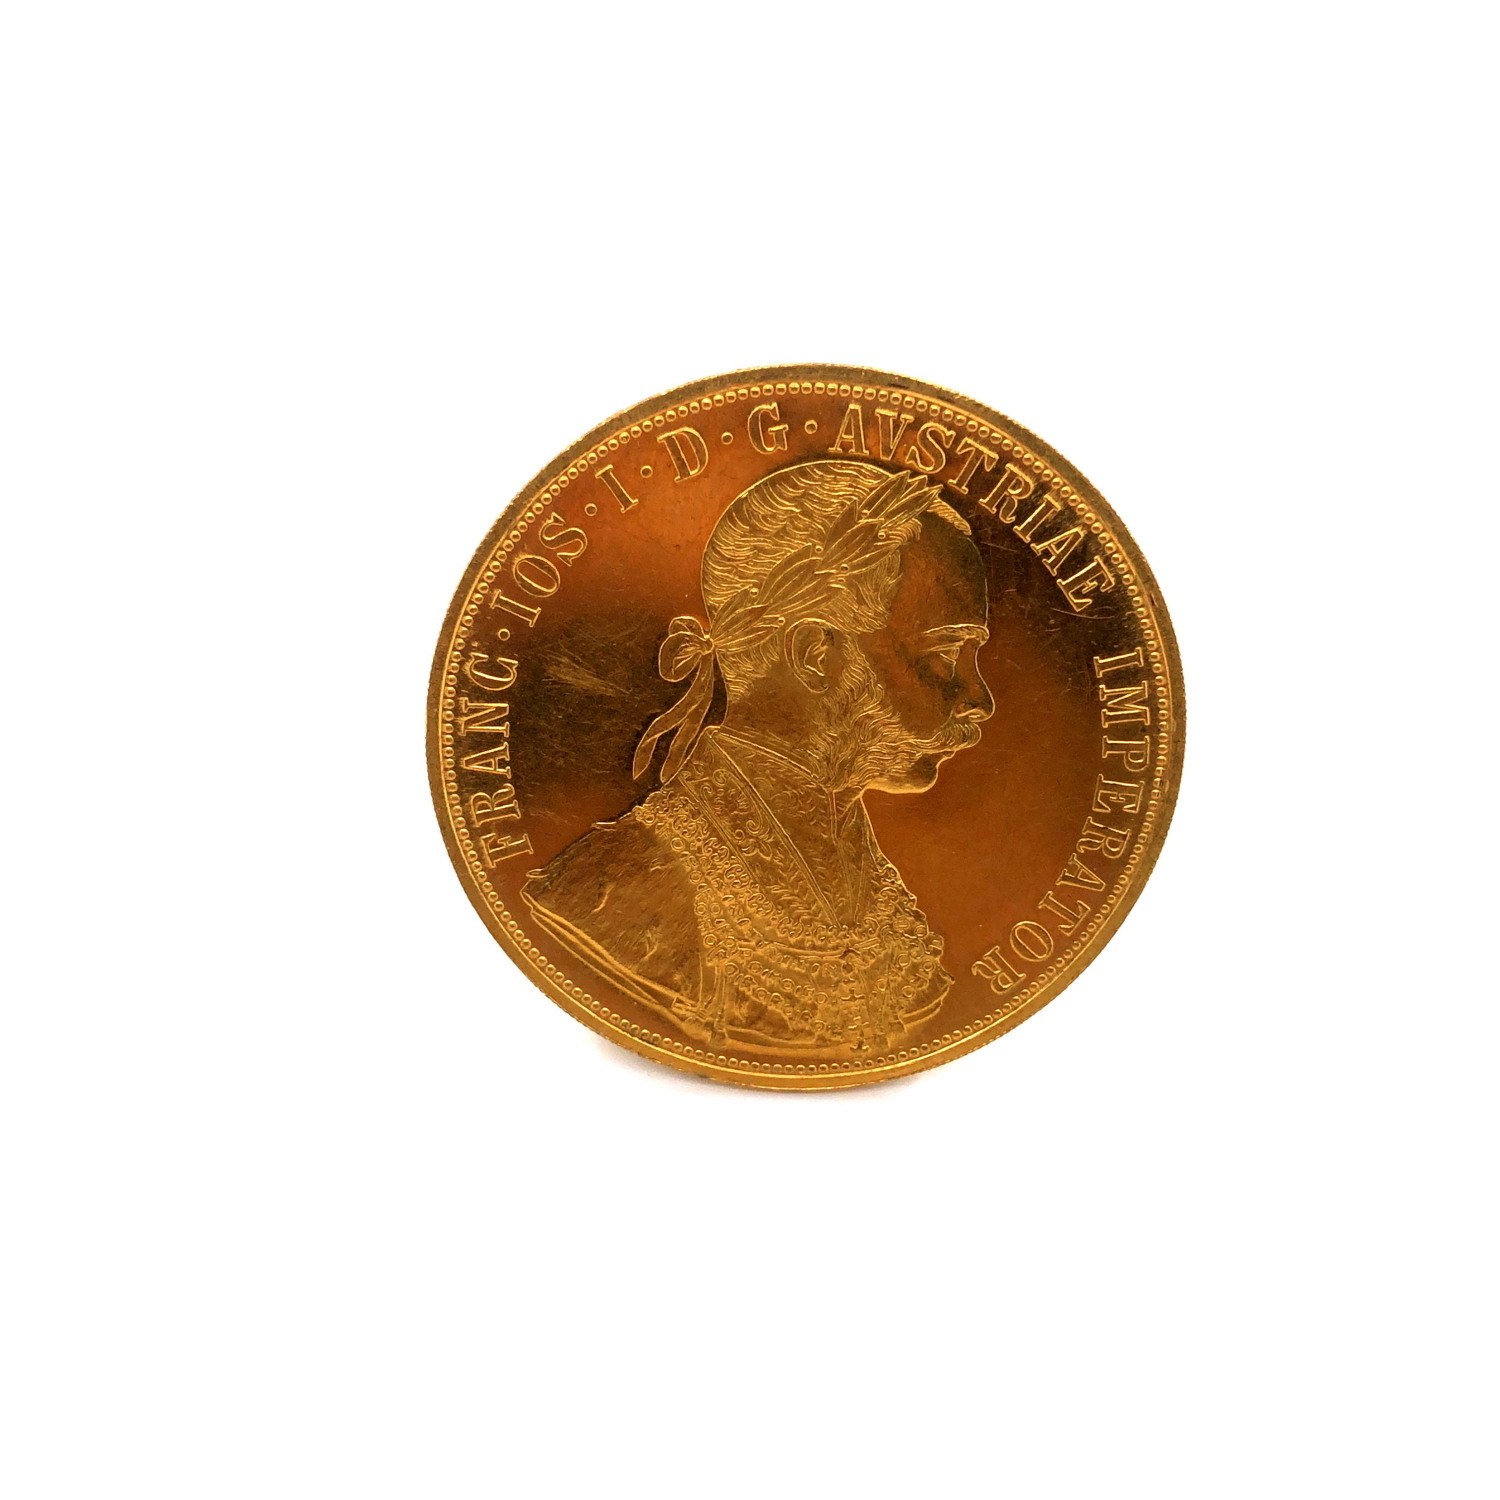 A 23ct GOLD 1915 AUSTRIAN MINT FOUR DUCAT COIN FEATURING FRANZ JOSEPH I ON THE OBVERSE AND THE